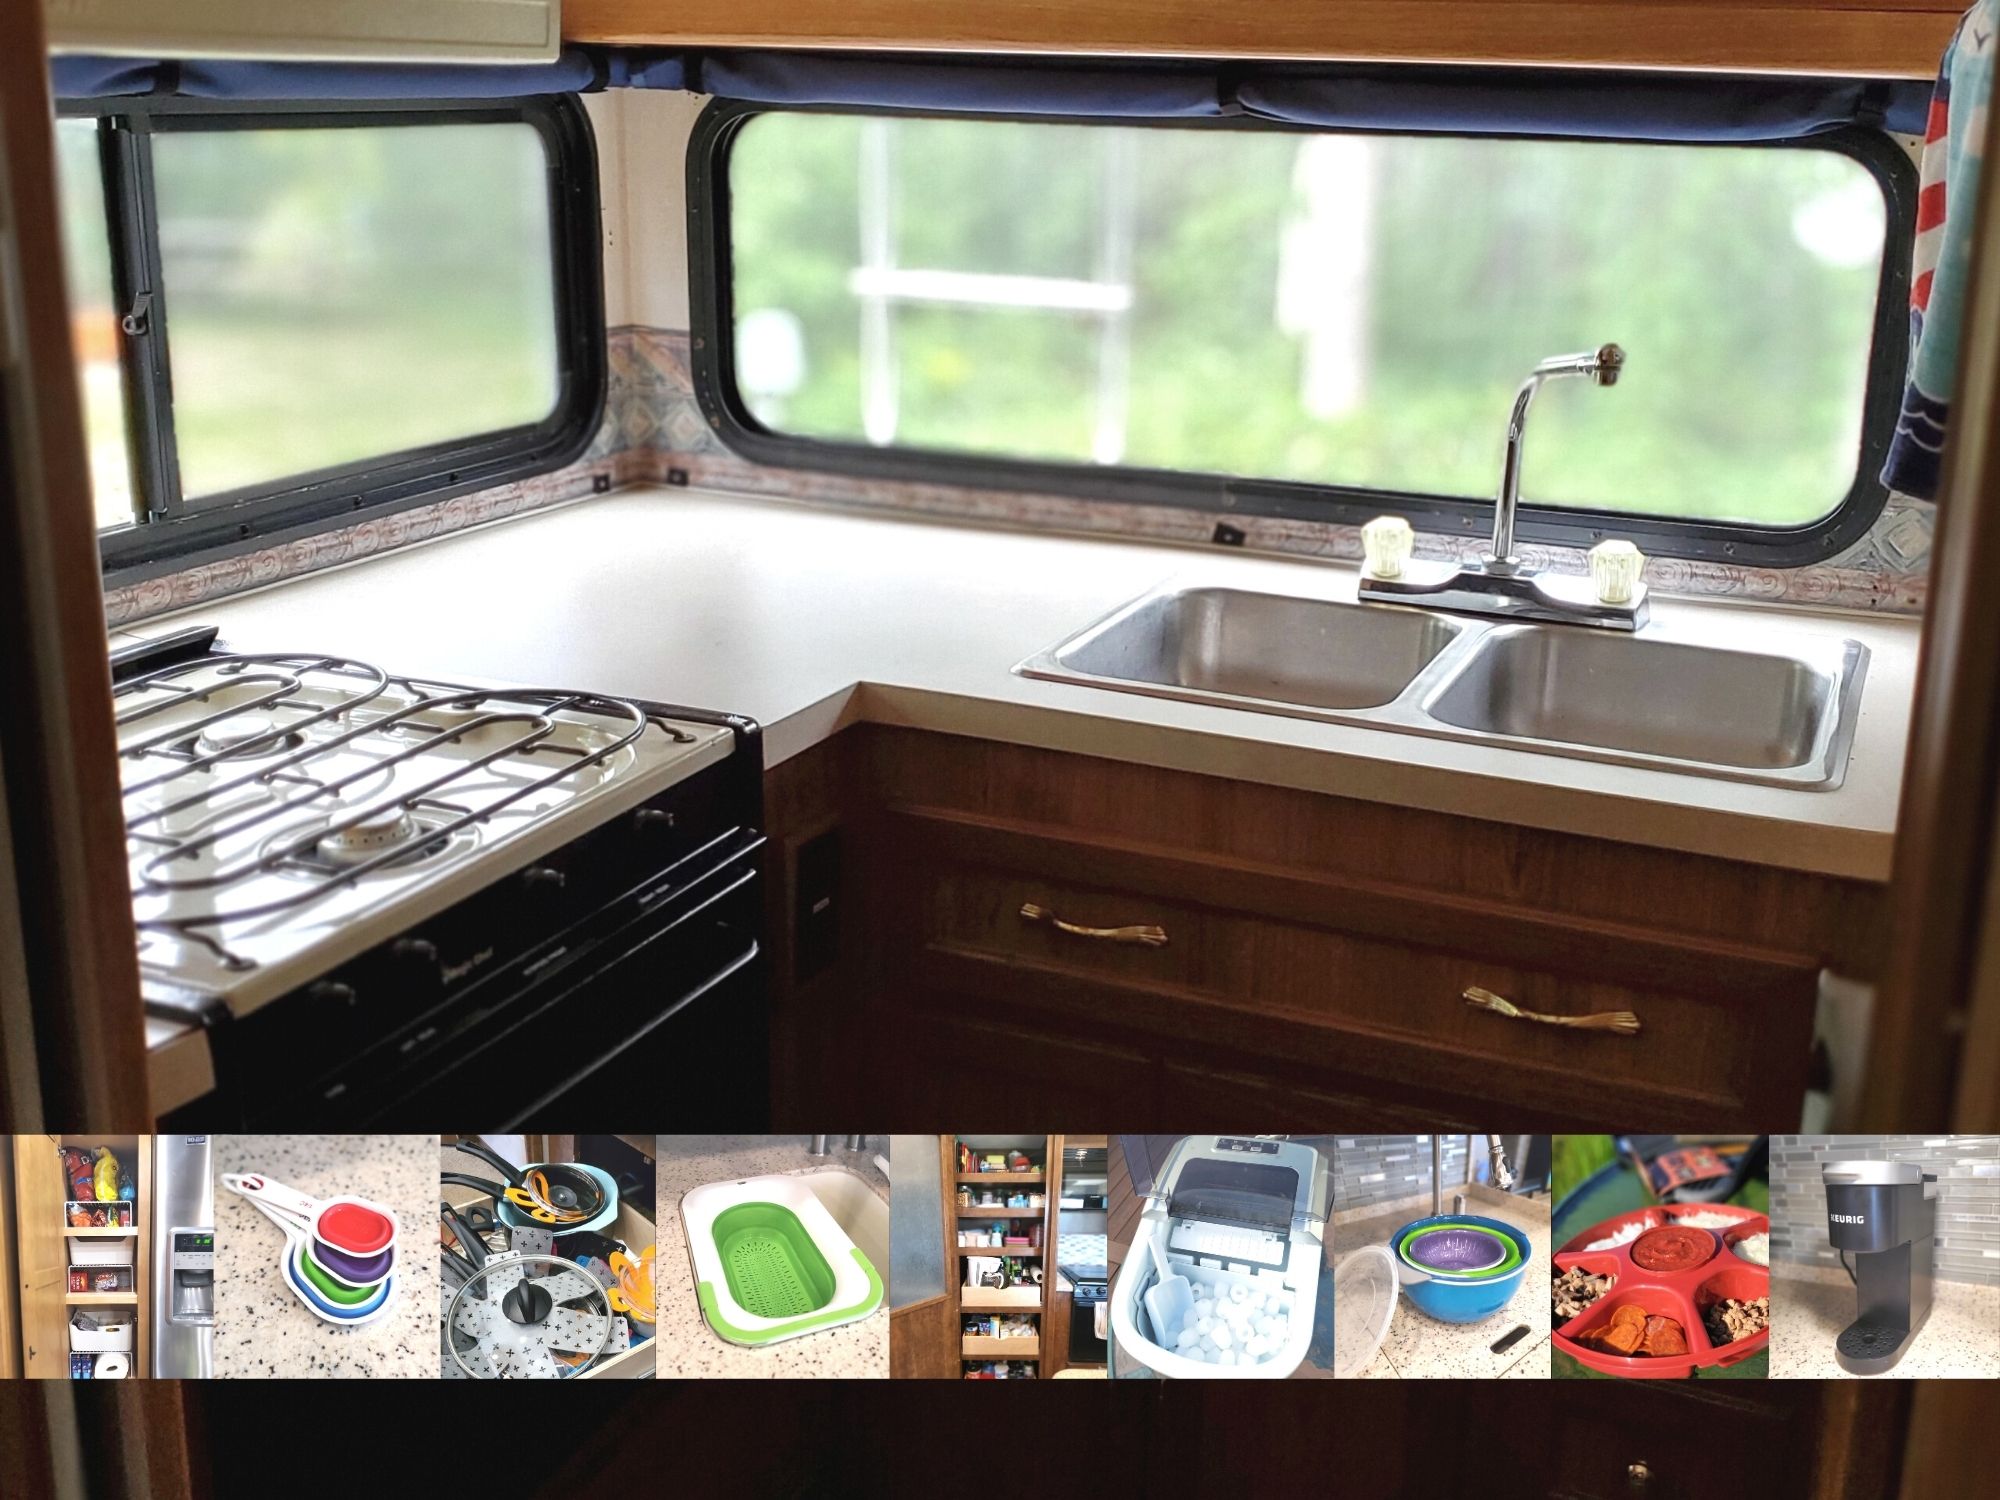 https://rvingisbeing.com/wp-content/uploads/Products-Accessories-for-Your-RV-Kitchen-Feature-1.jpg